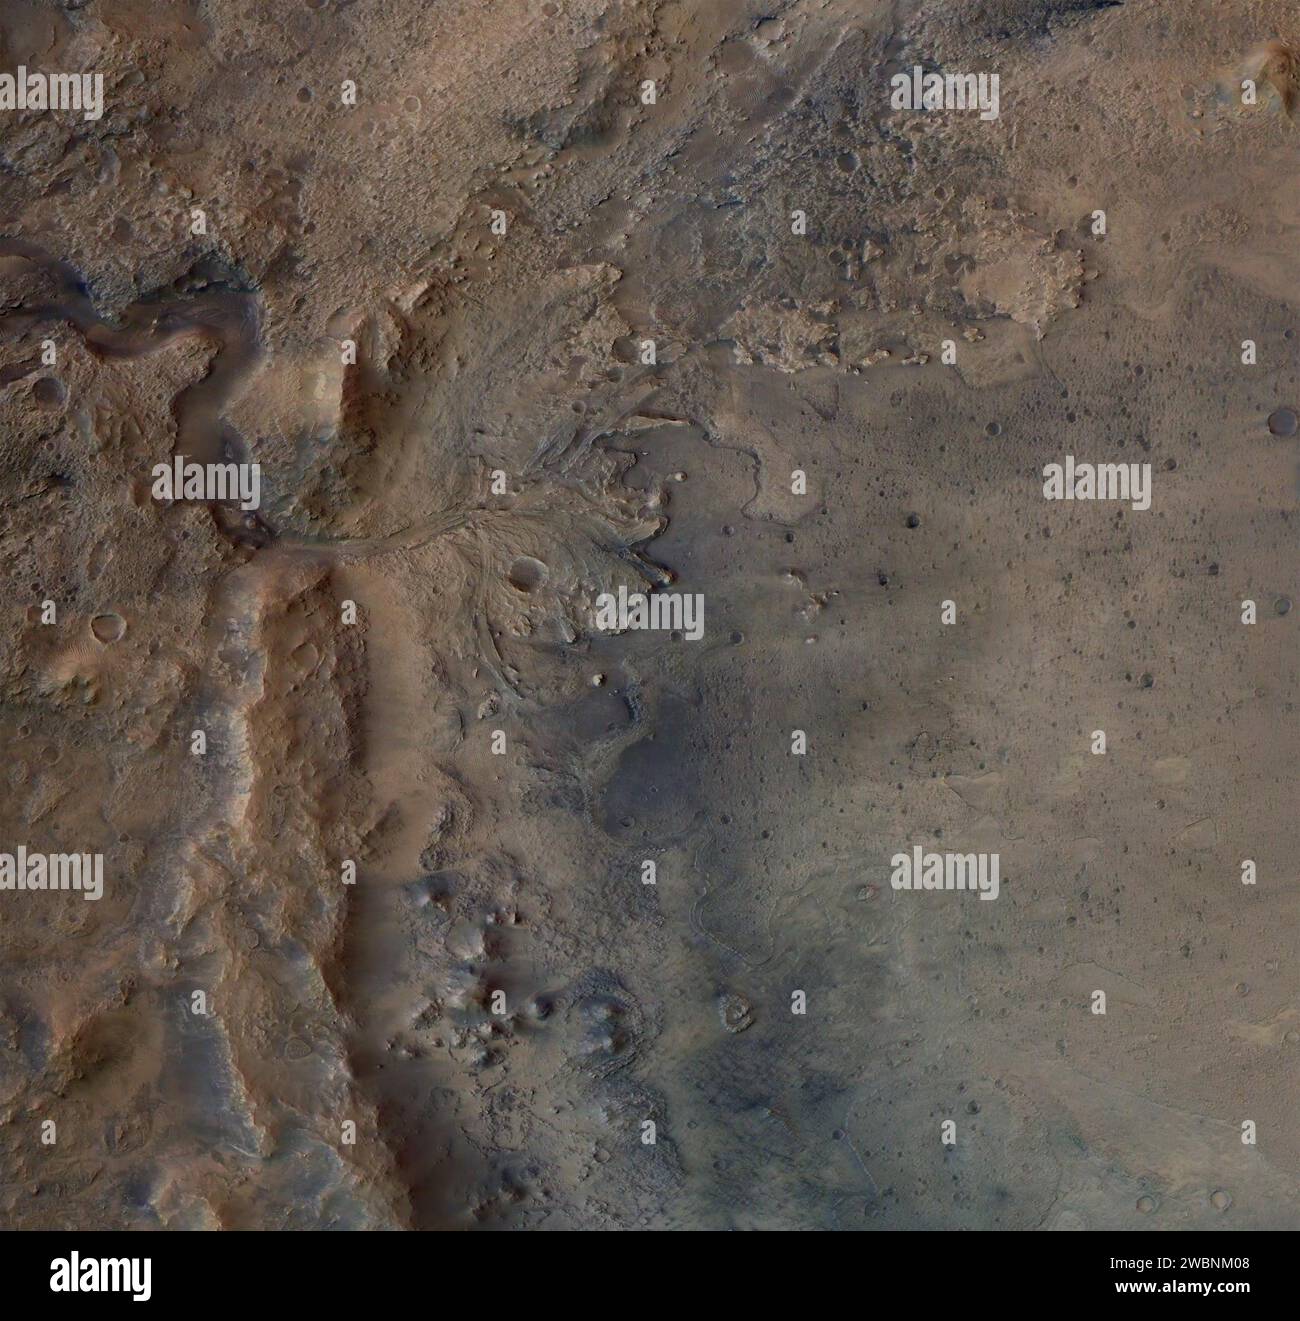 This image shows the remains of an ancient delta in Mars' Jezero Crater, which NASA's Perseverance Mars rover will explore for signs of fossilized microbial life. The image was taken by the High Resolution Stereo Camera aboard the ESA (European Space Agency) Mars Express orbiter. The European Space Operations Centre in Darmstadt, Germany, operates the ESA mission. The High Resolution Stereo Camera was developed by a group with leadership at the Freie Universitat Berlin. Stock Photo